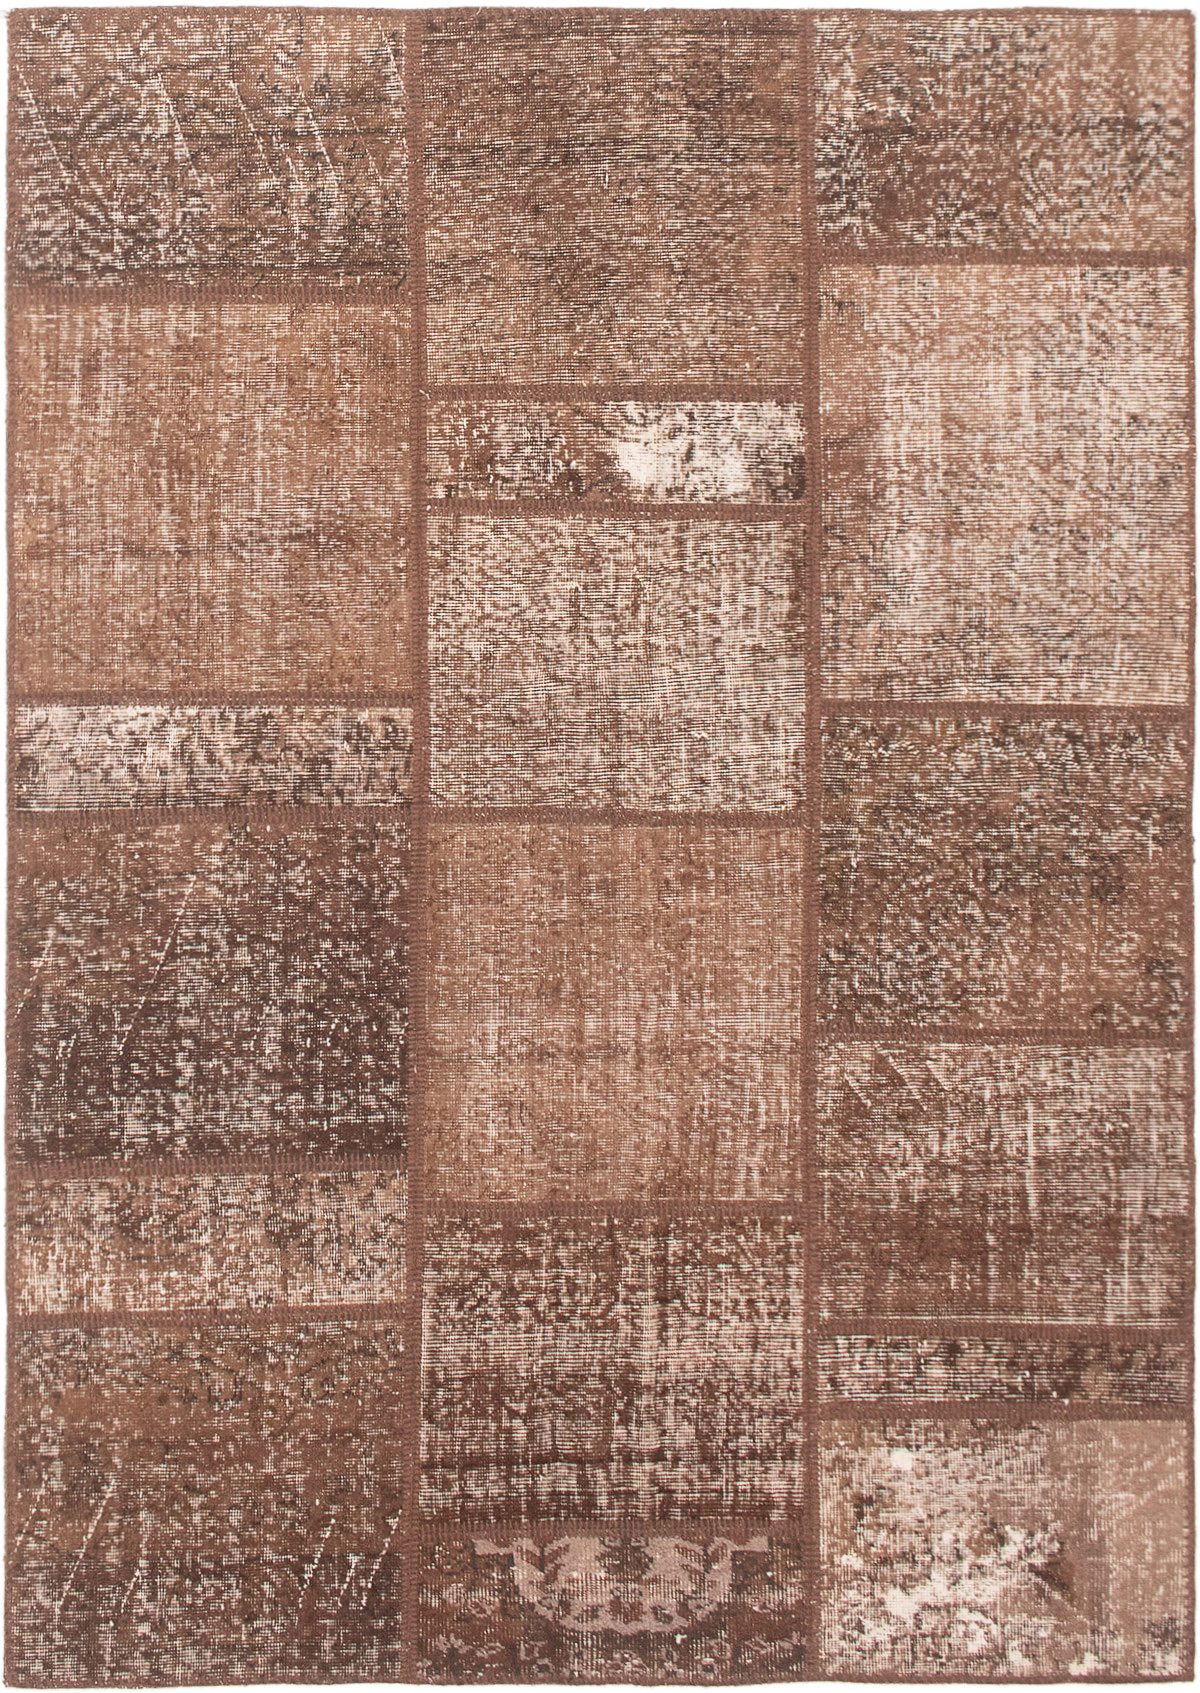 Hand-knotted Color Transition Patch Brown Wool Rug 4'10" x 6'10" Size: 4'10" x 6'10"  